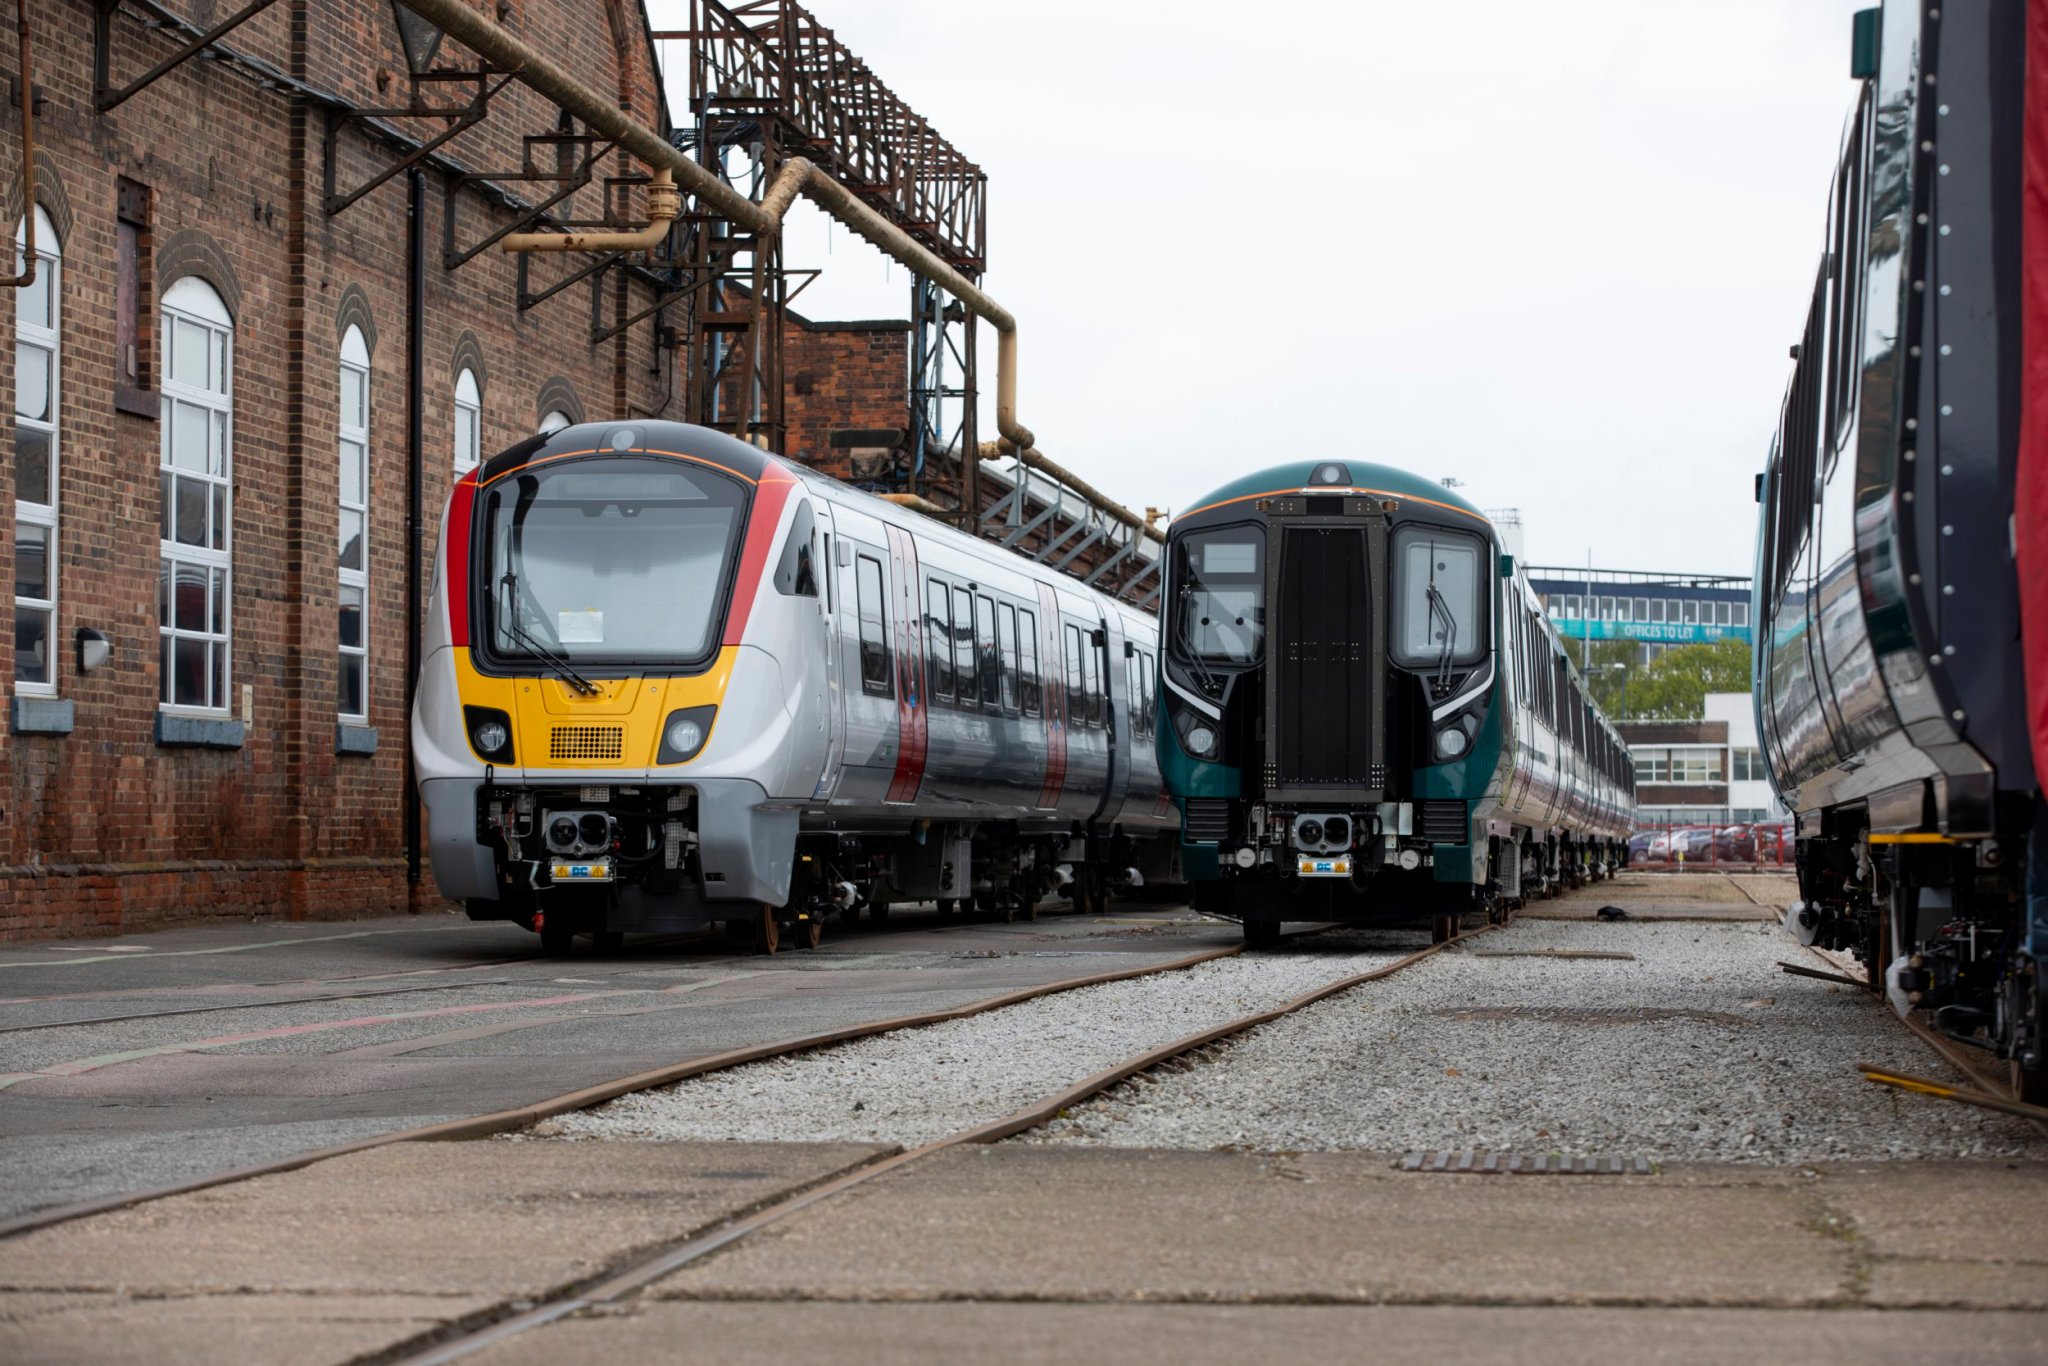 The Alstom trains at its Derby plant